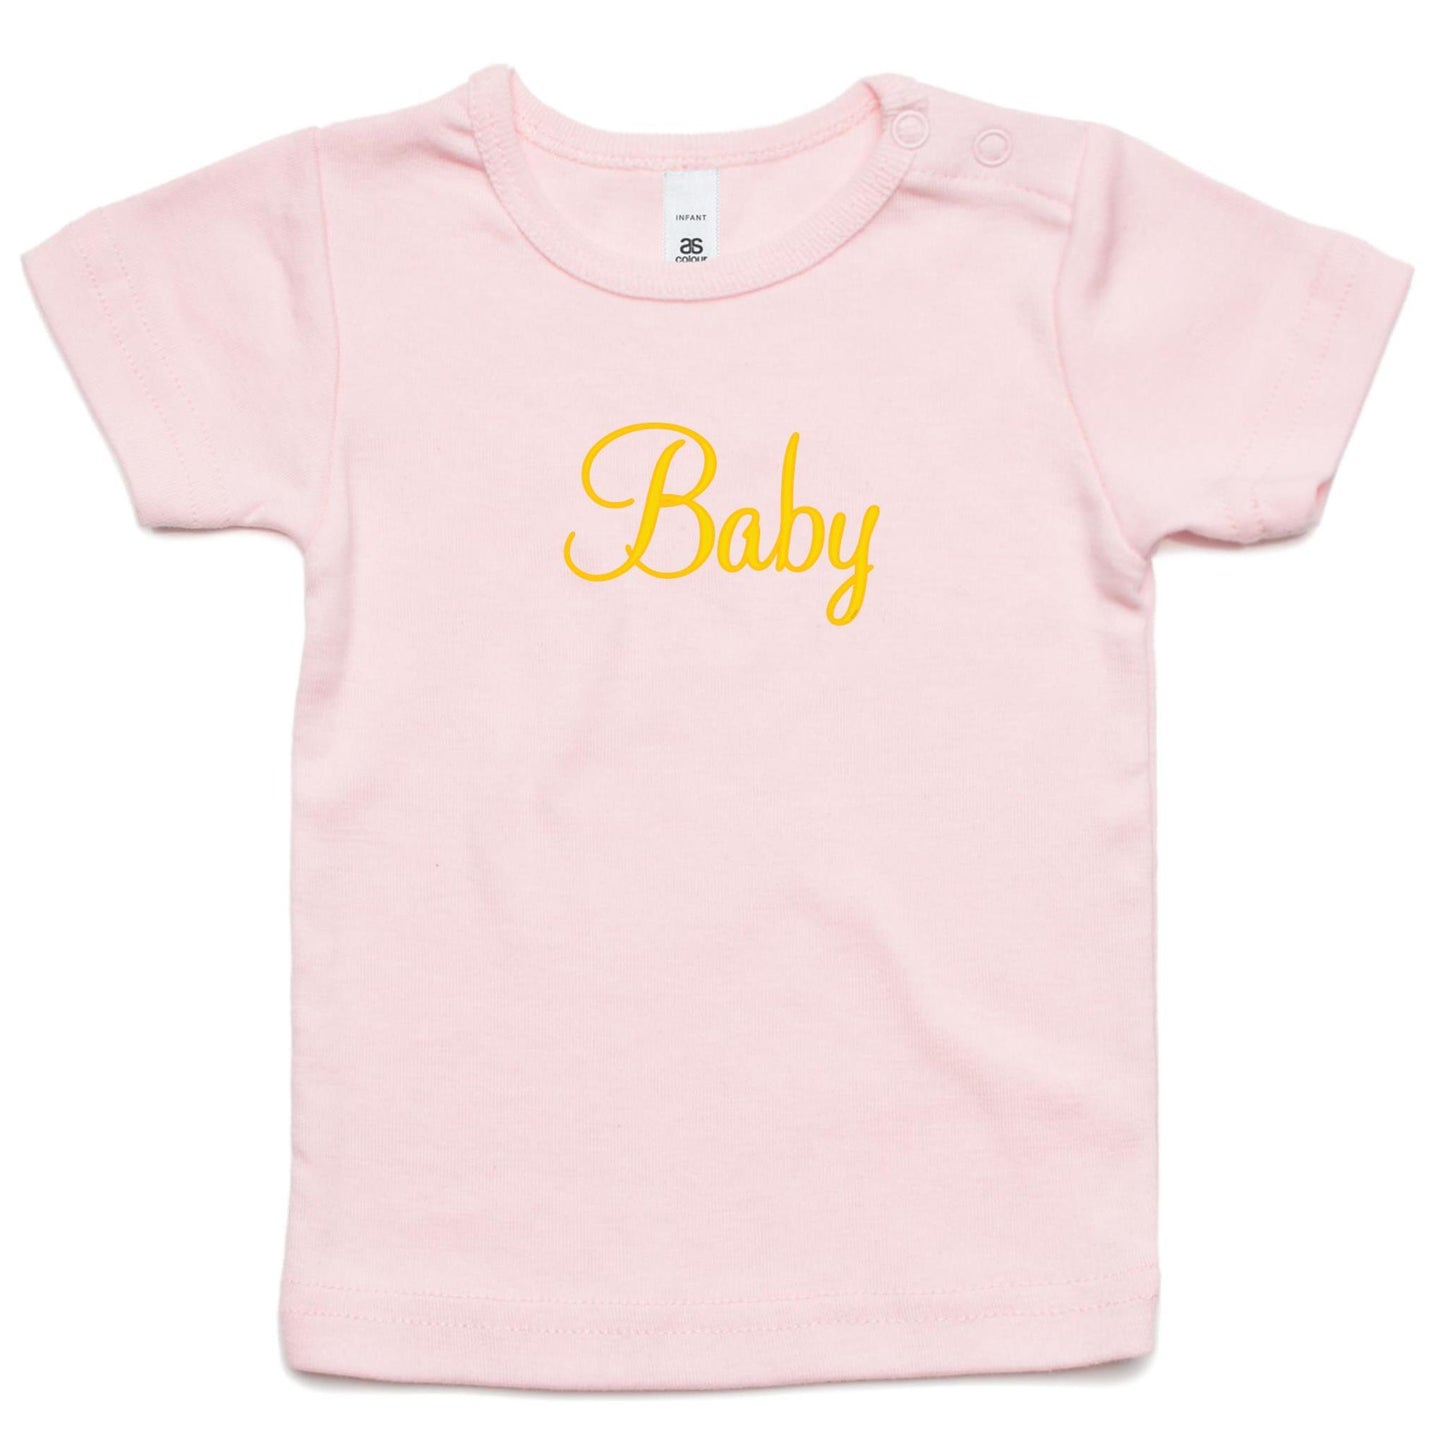 Baby T Shirt for Babies